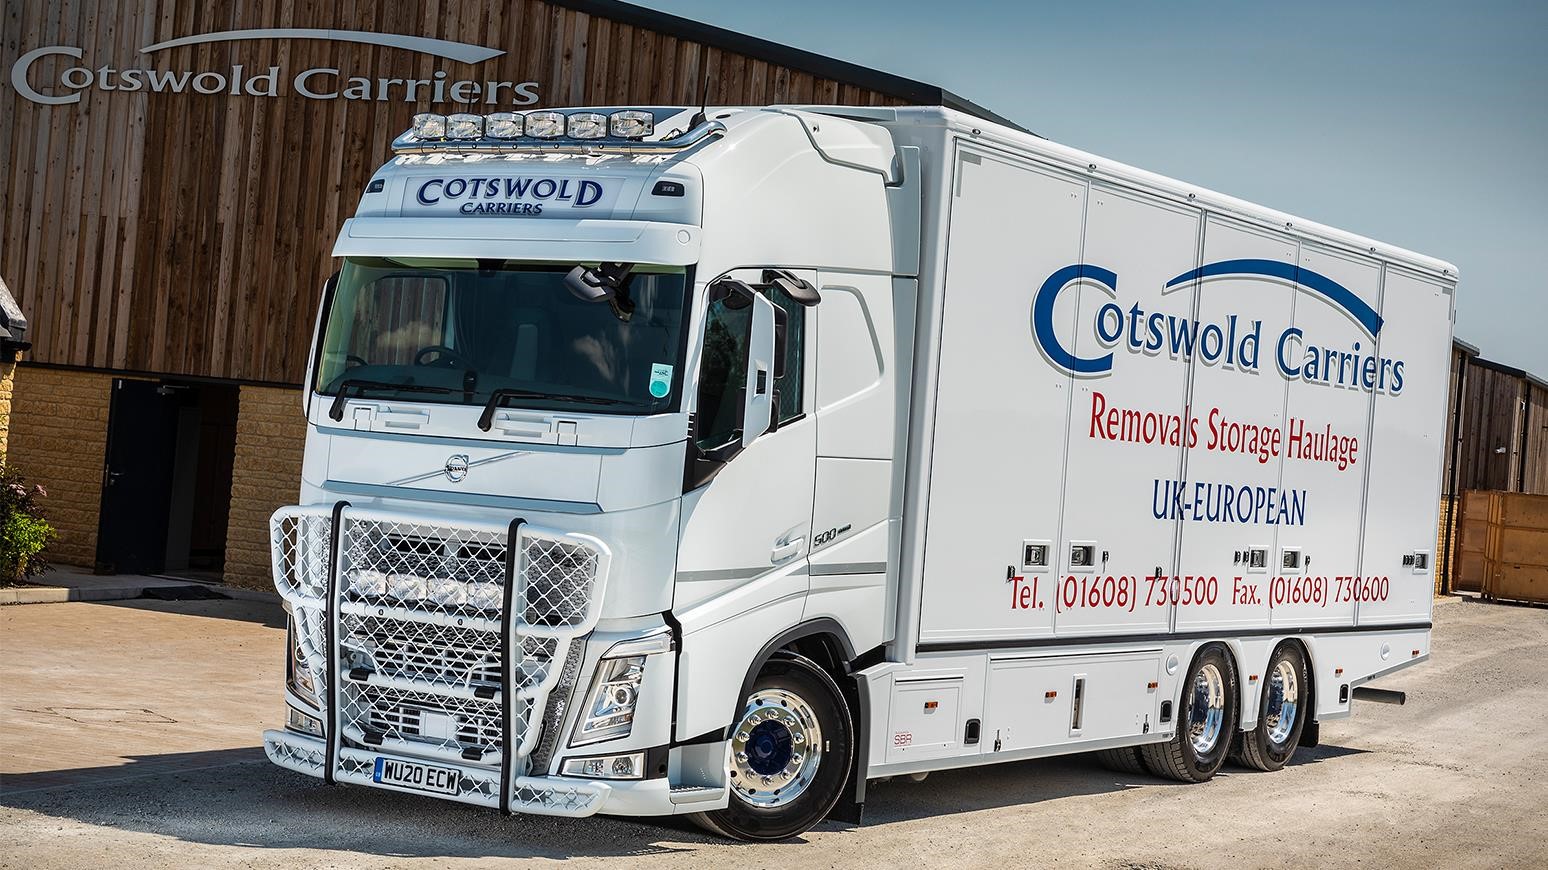 Oxfordshire-Based Cotswold Carriers Adds New Volvo FH Box Truck For Its Removal Operations